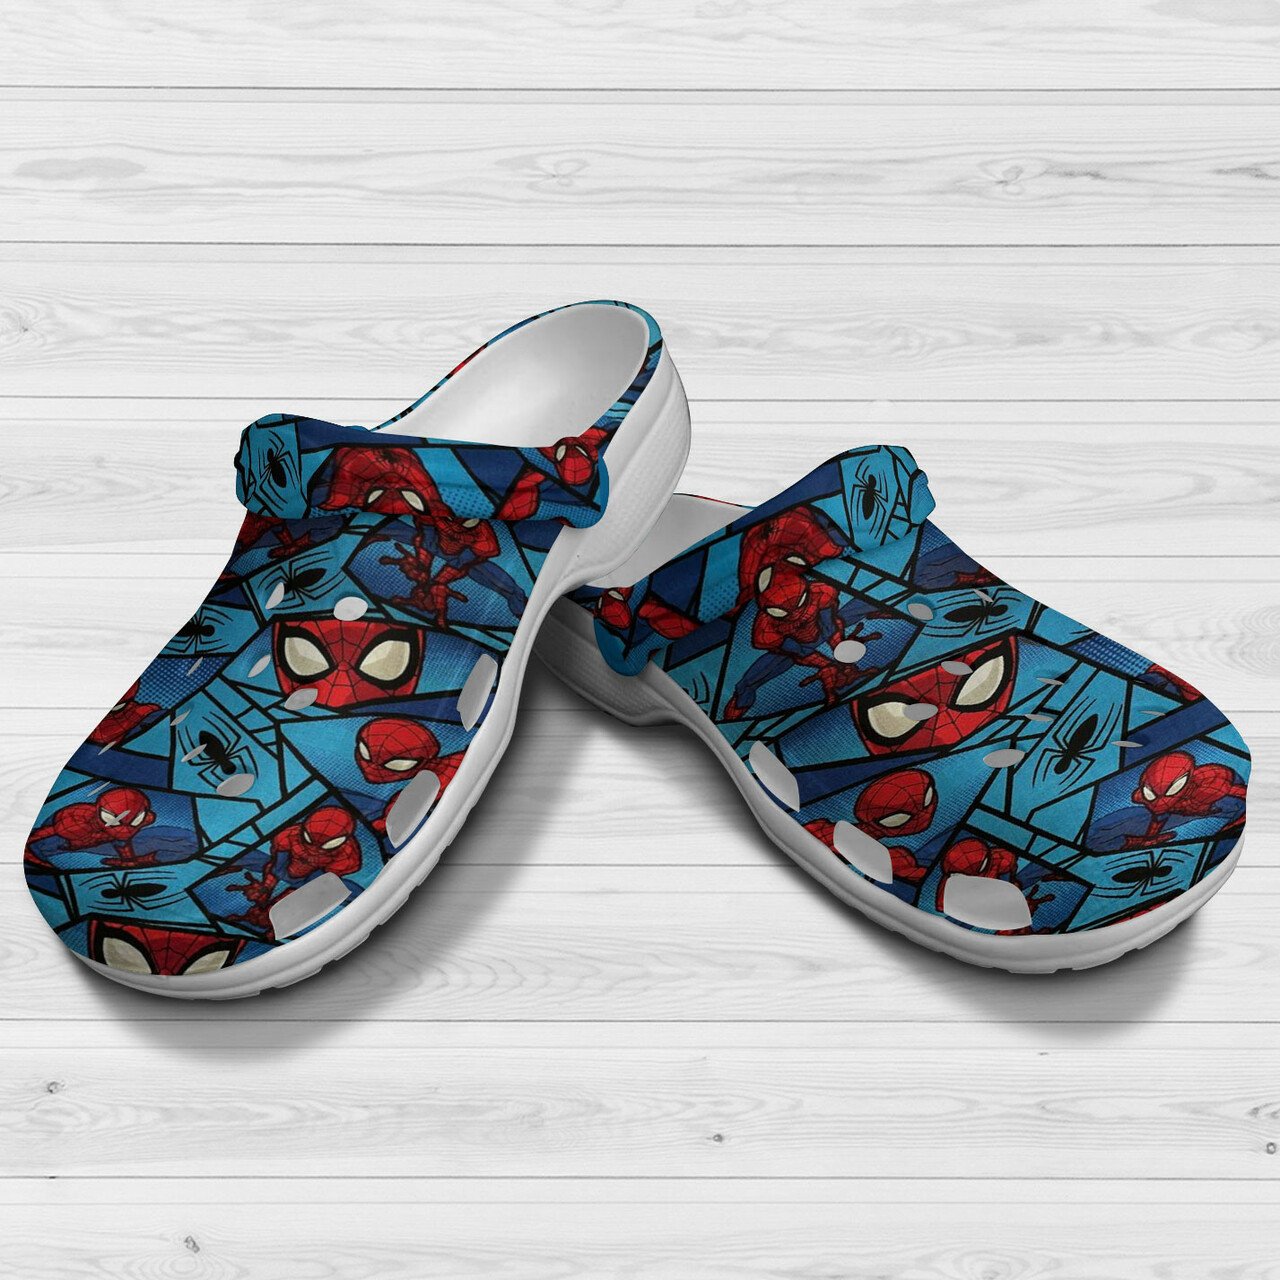 Spider Man Is Here Crocss Crocband Clog Comfortable Water Shoes